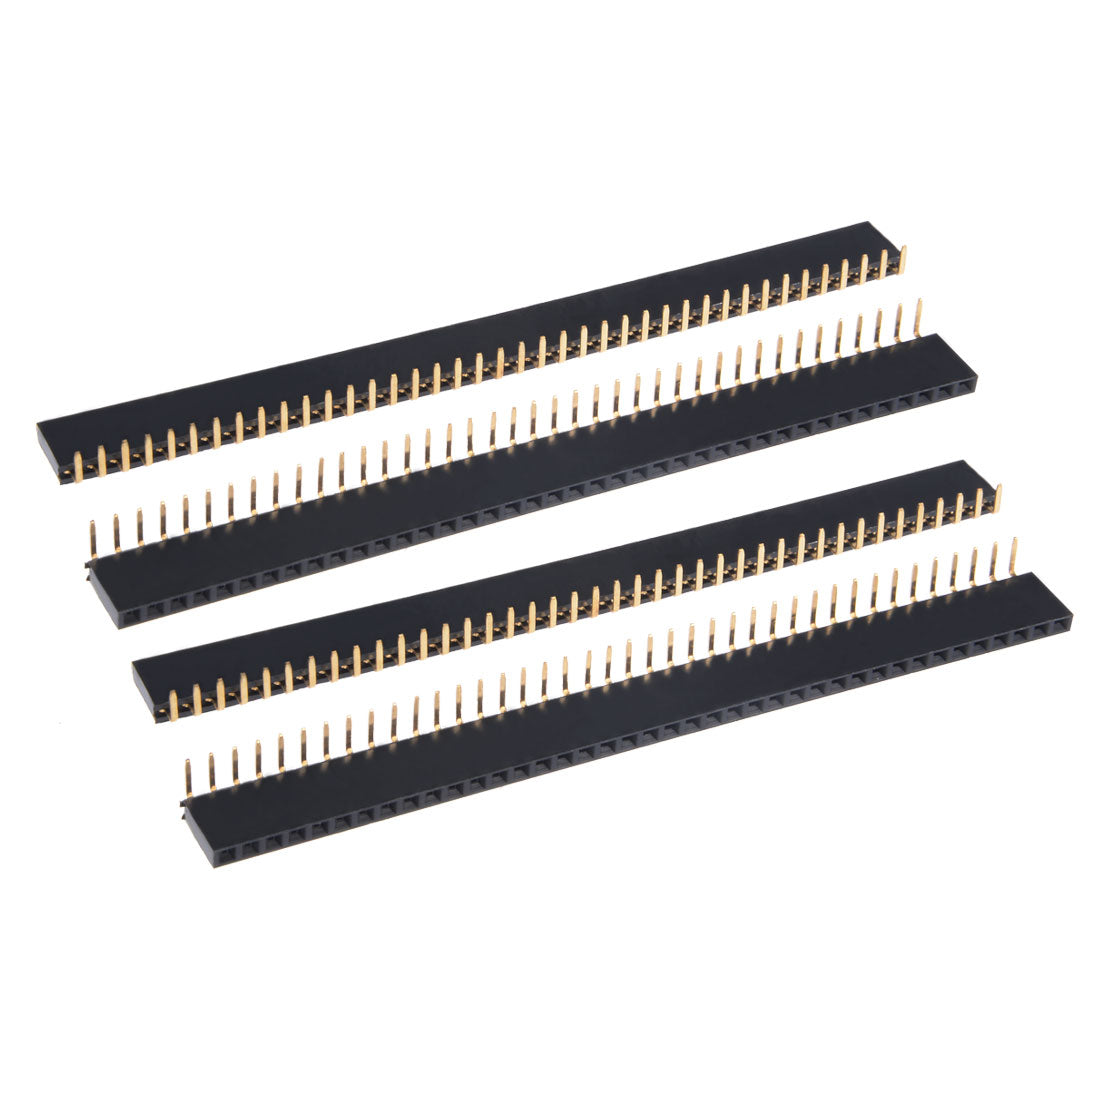 uxcell Uxcell 5 Pcs 2.54mm Pitch 40Pin Single Row Curved Connector Pin Header Strip for Arduino Prototype Shield